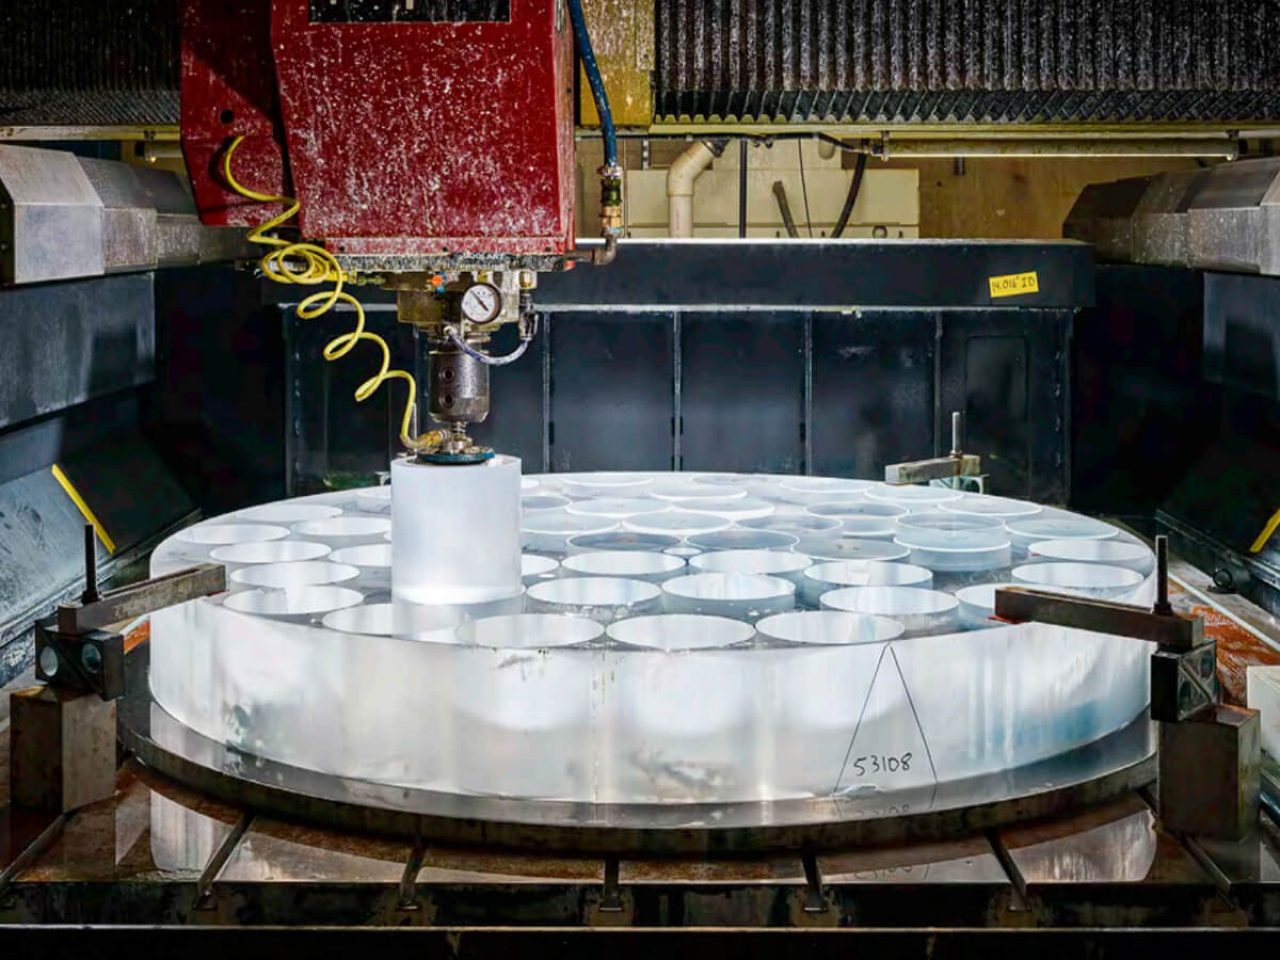 A robotic arm extracts a cylindricle glass core that has been cut from the boule by a machine. The boule is cylindrical opaque glass that is wider than it is tall with many cores already cut out of it.